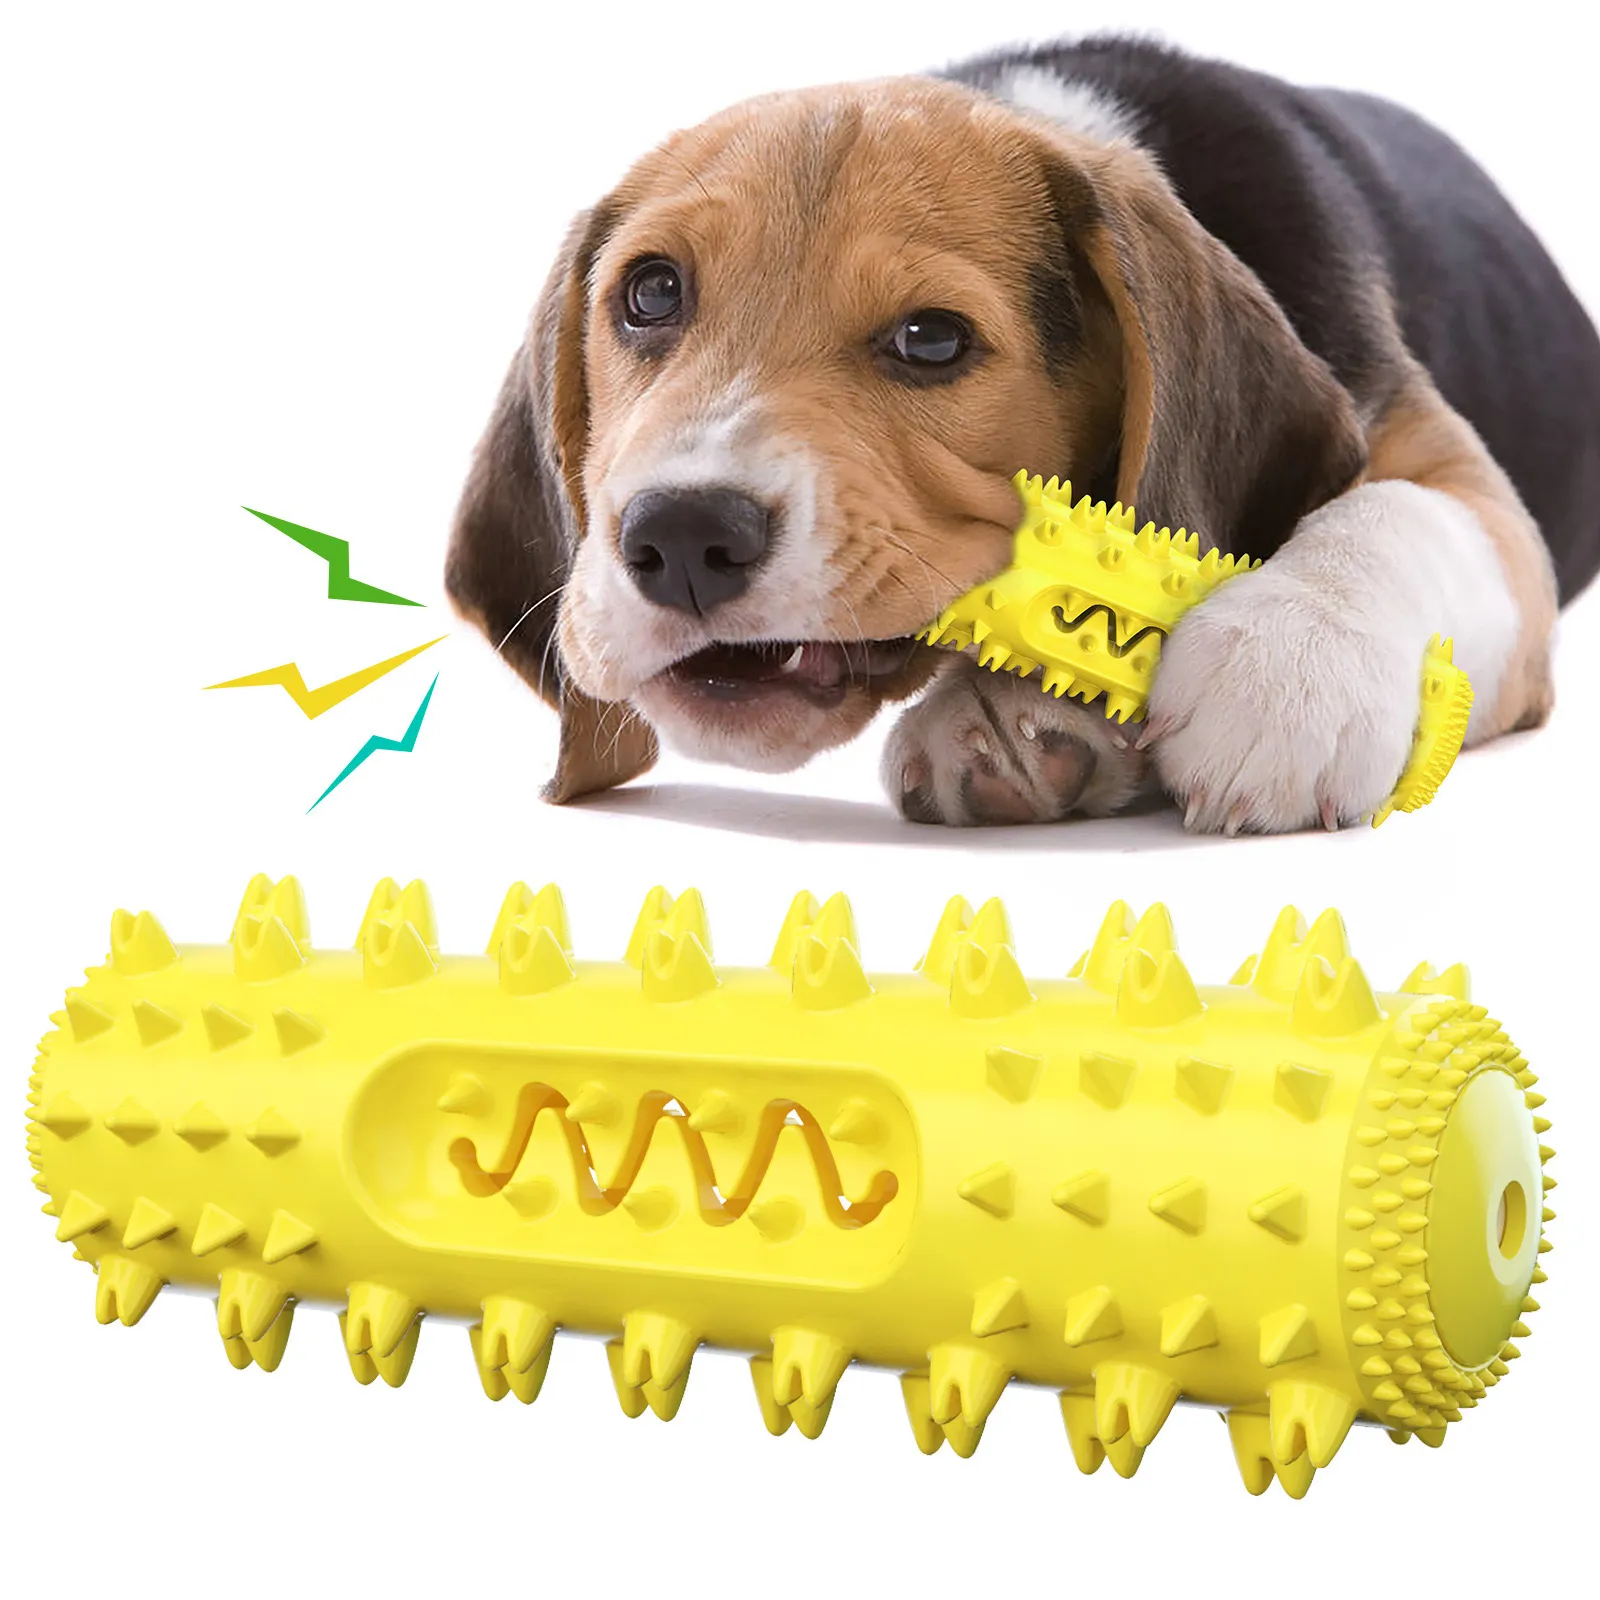 dog ate silicone toy